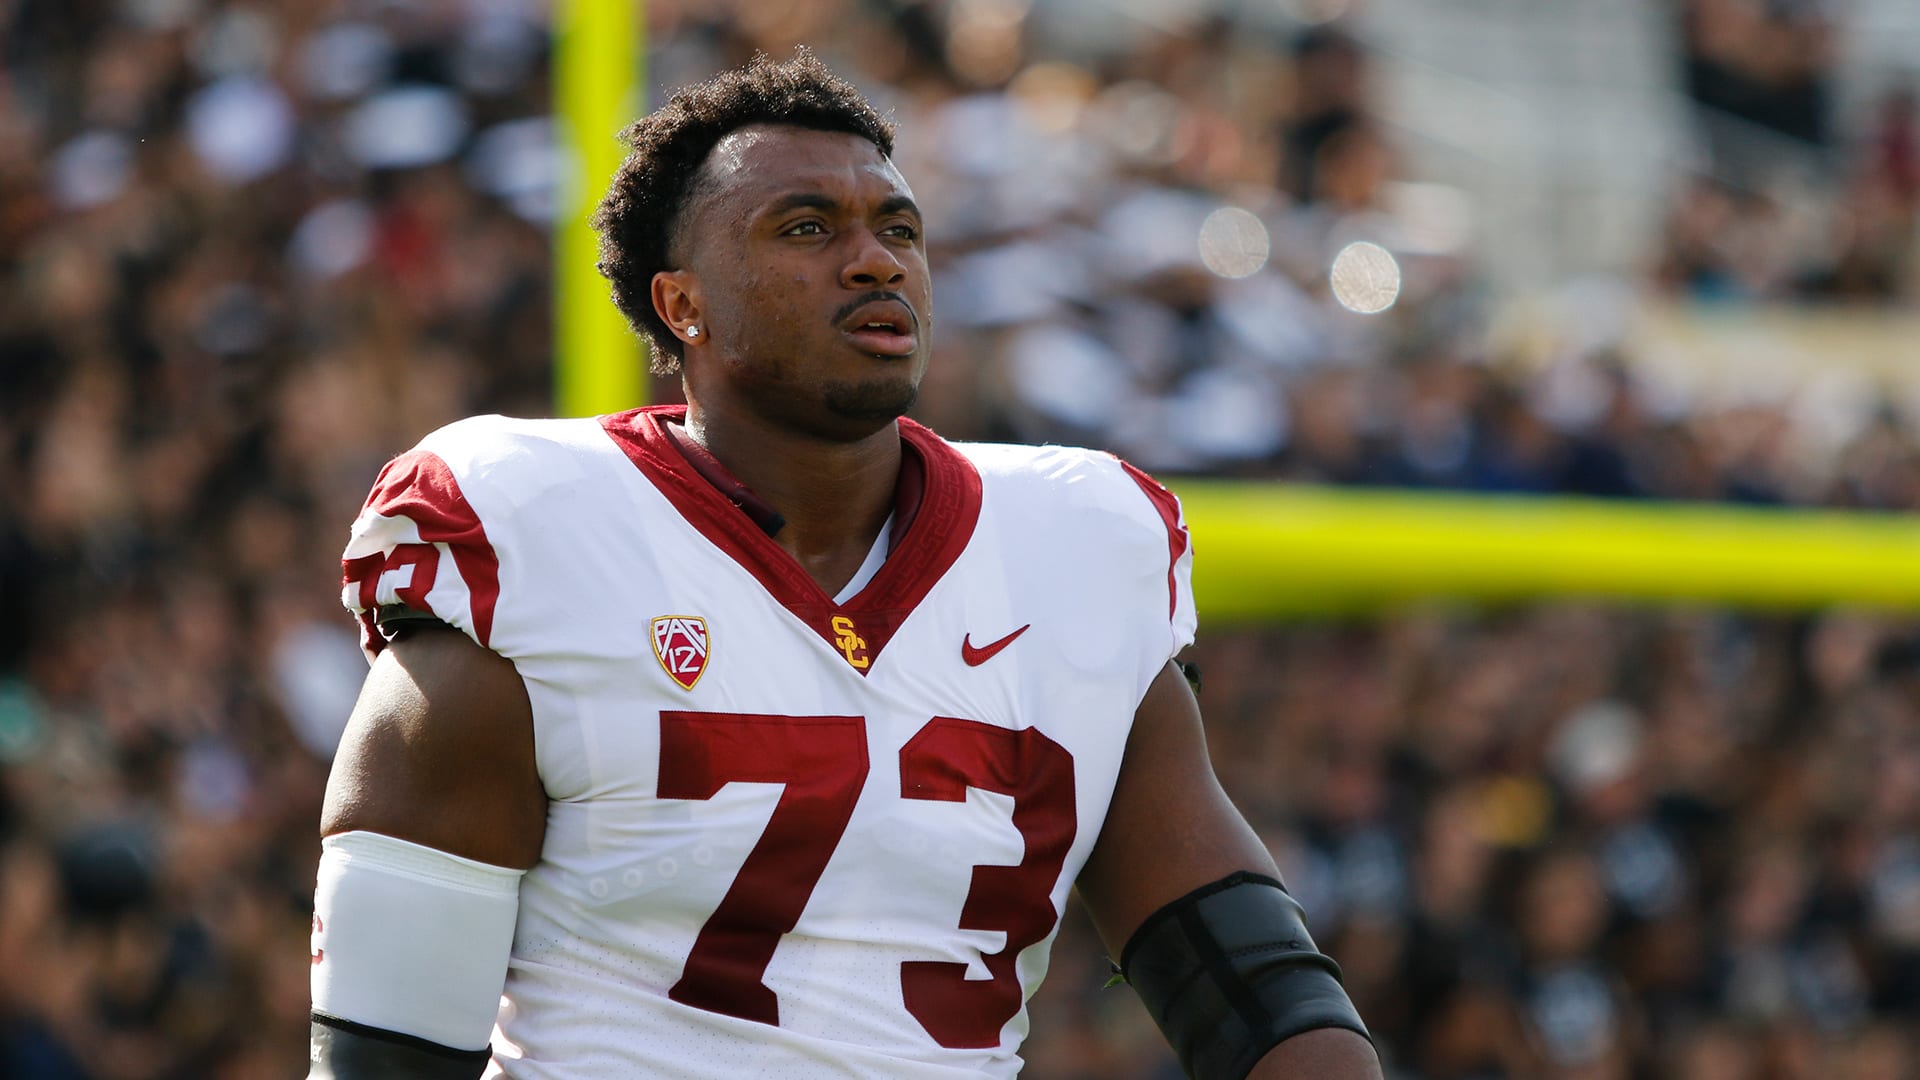 NFL Draft 2020: Which USC football players should stay or go?